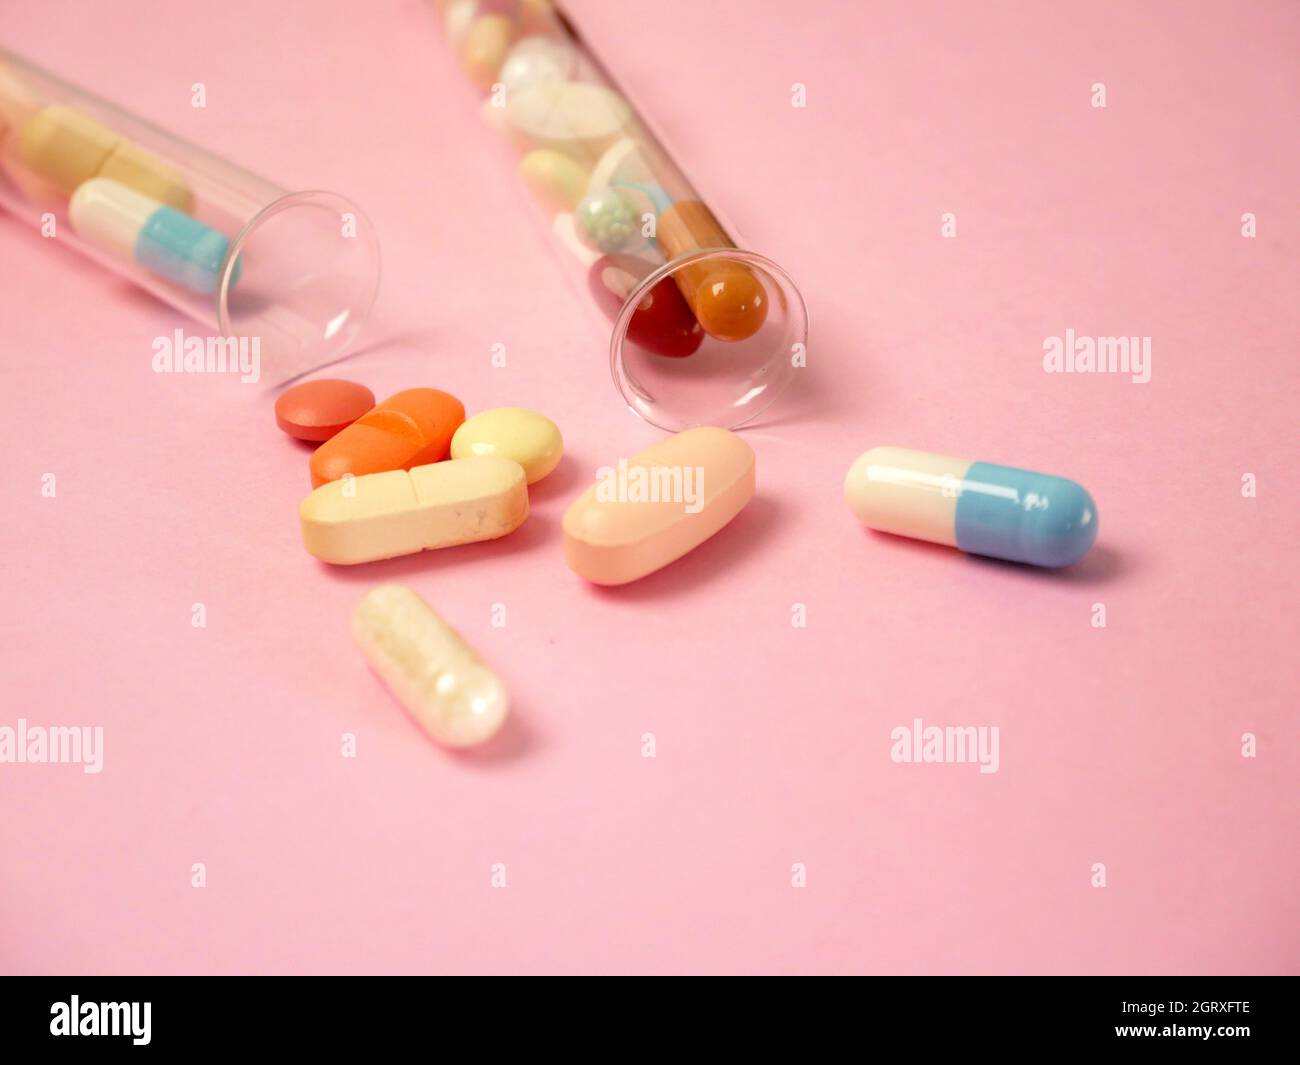 Medicines Spilling From Test Tubes Over Pink Background Stock Photo